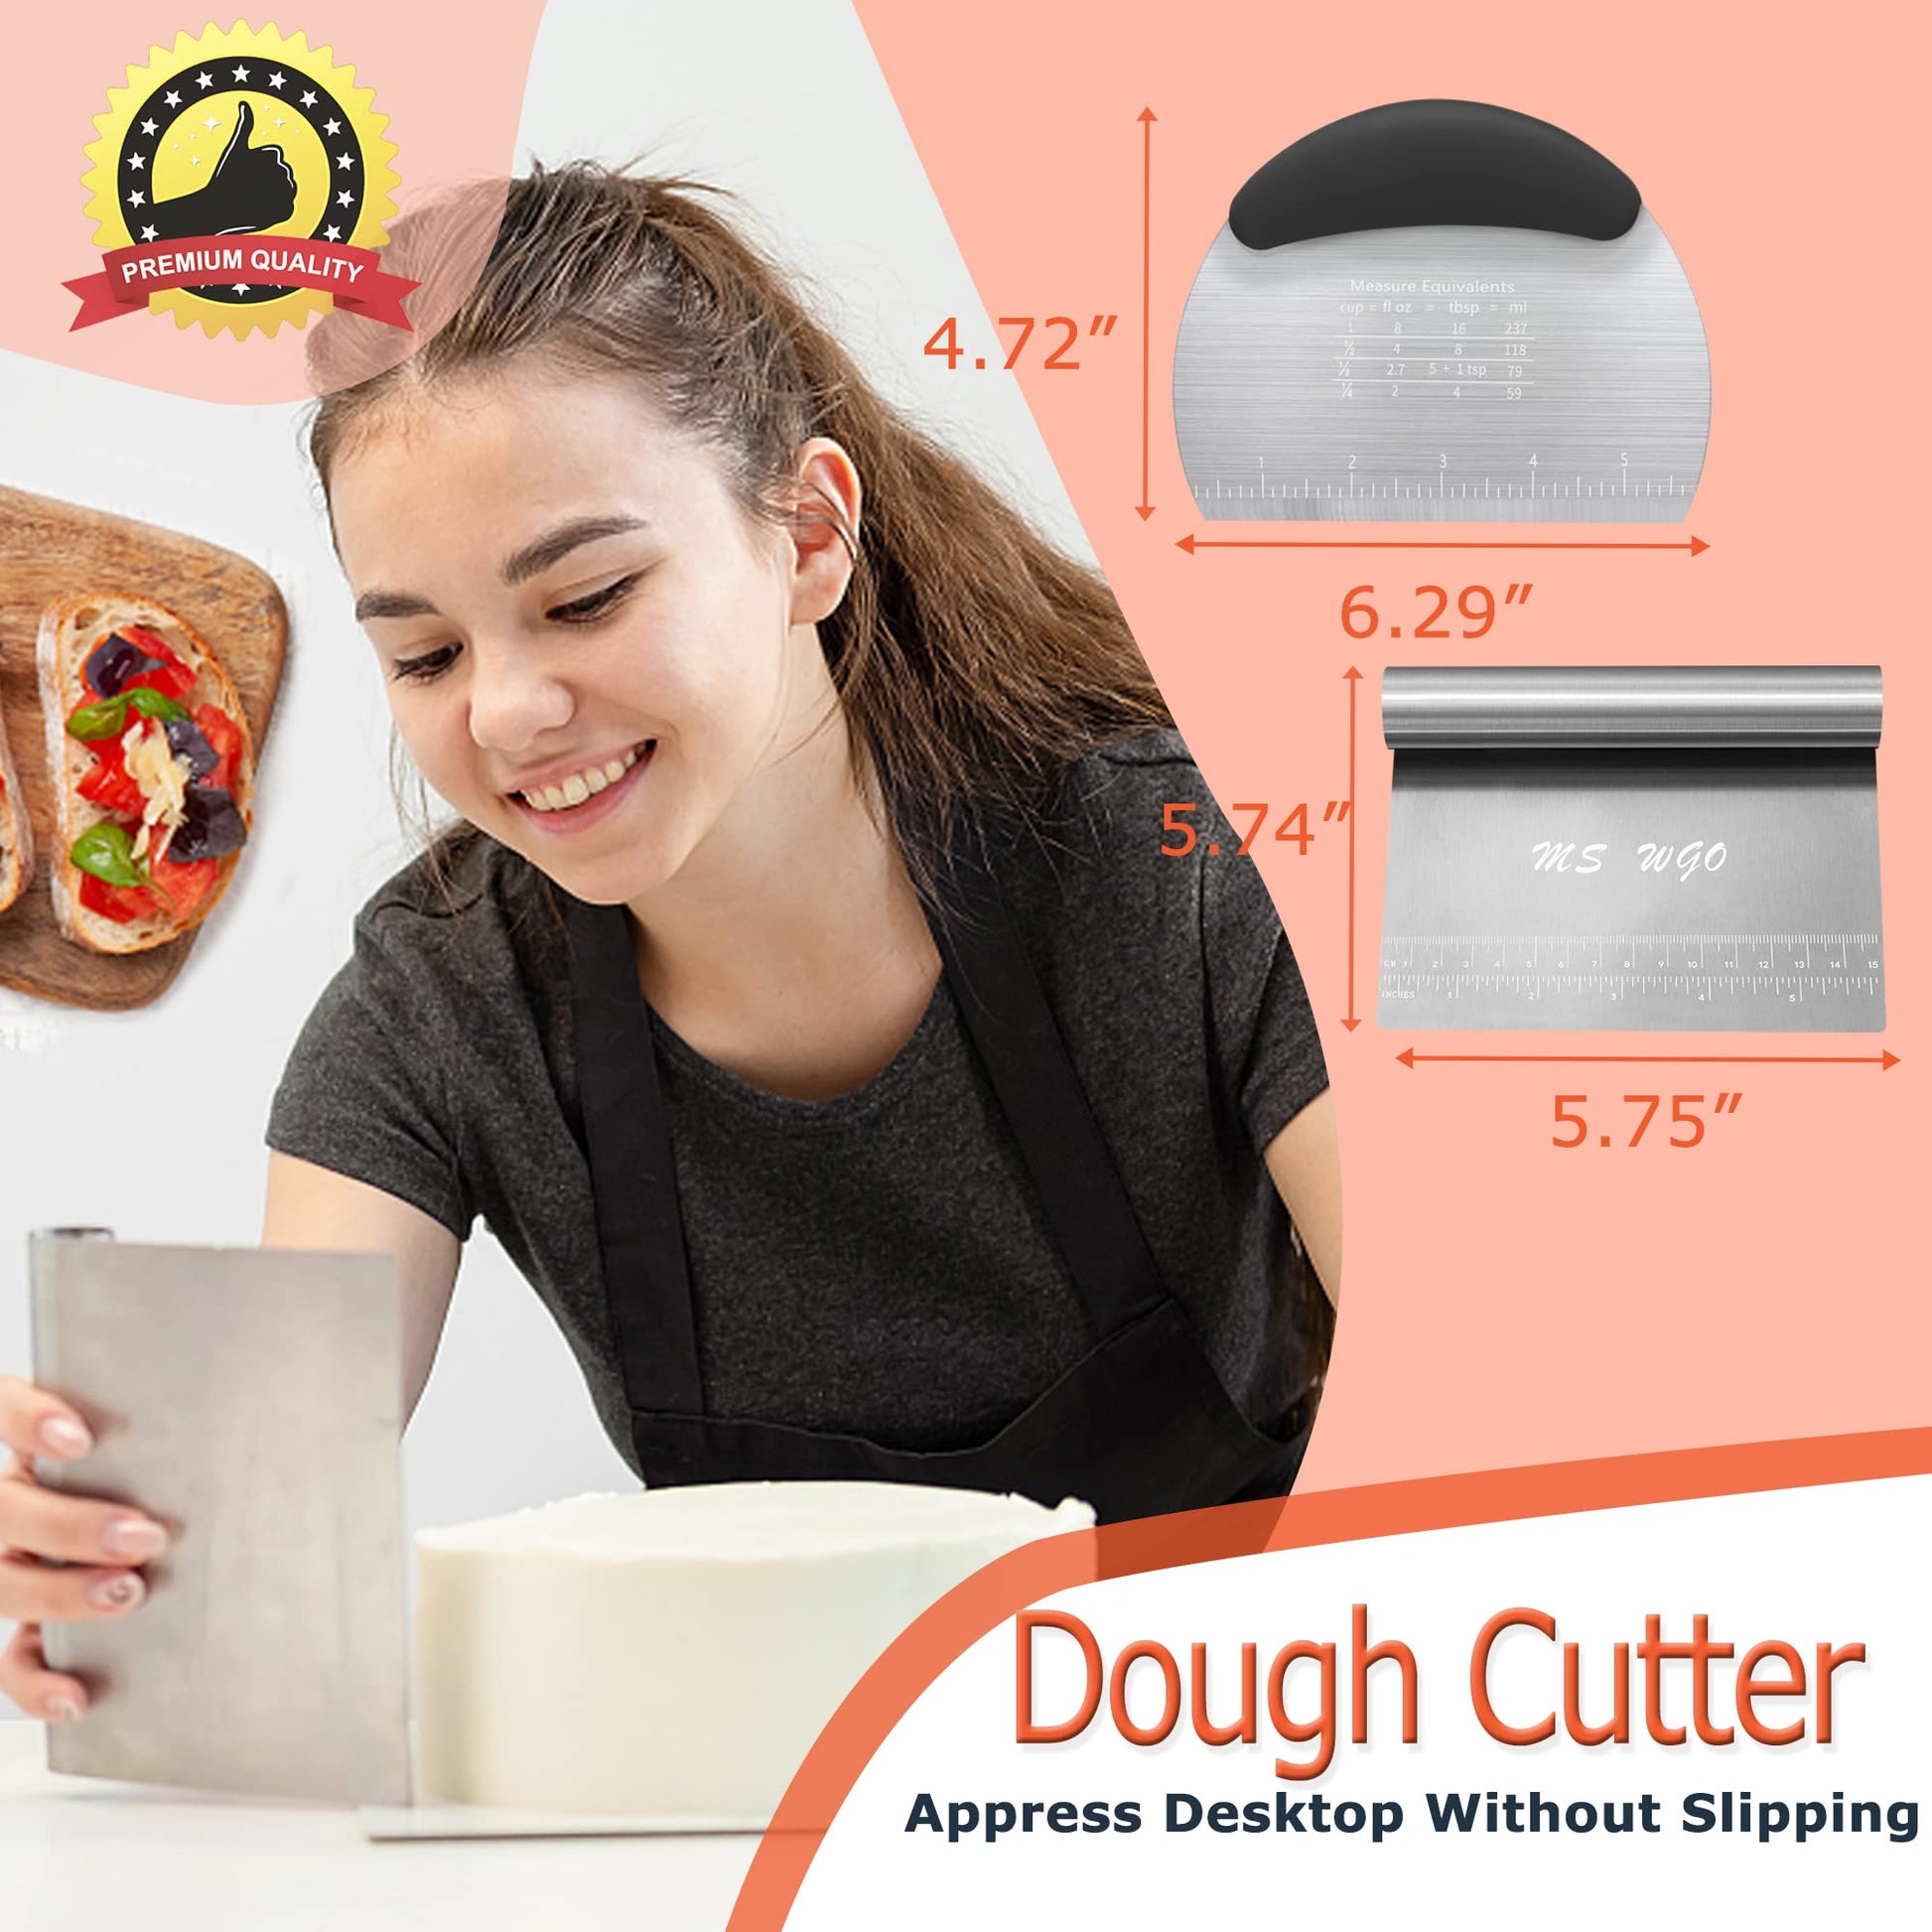 MS WGO Pro Dough Pastry Scraper, 1pcs Cutter, Chopper Stainless Steel  Mirror Polished with Measuring Scale Multipurpose- Cake, Pizza Cutter -  Pastry